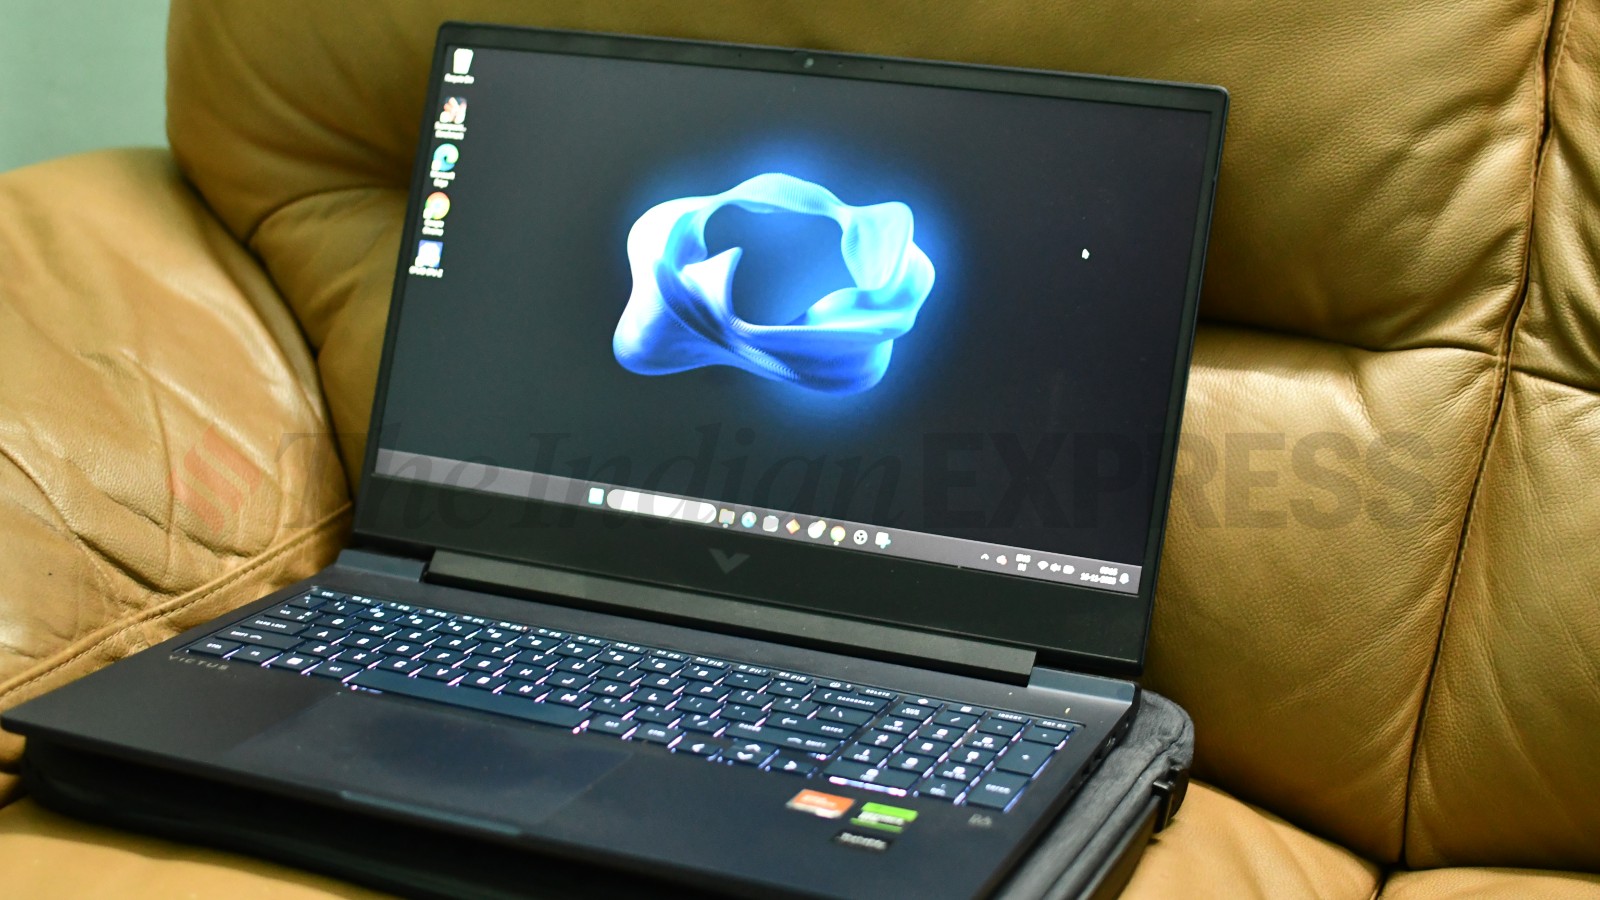 HP Victus 16 review: Mainstream and affordable - Can Buy or Not